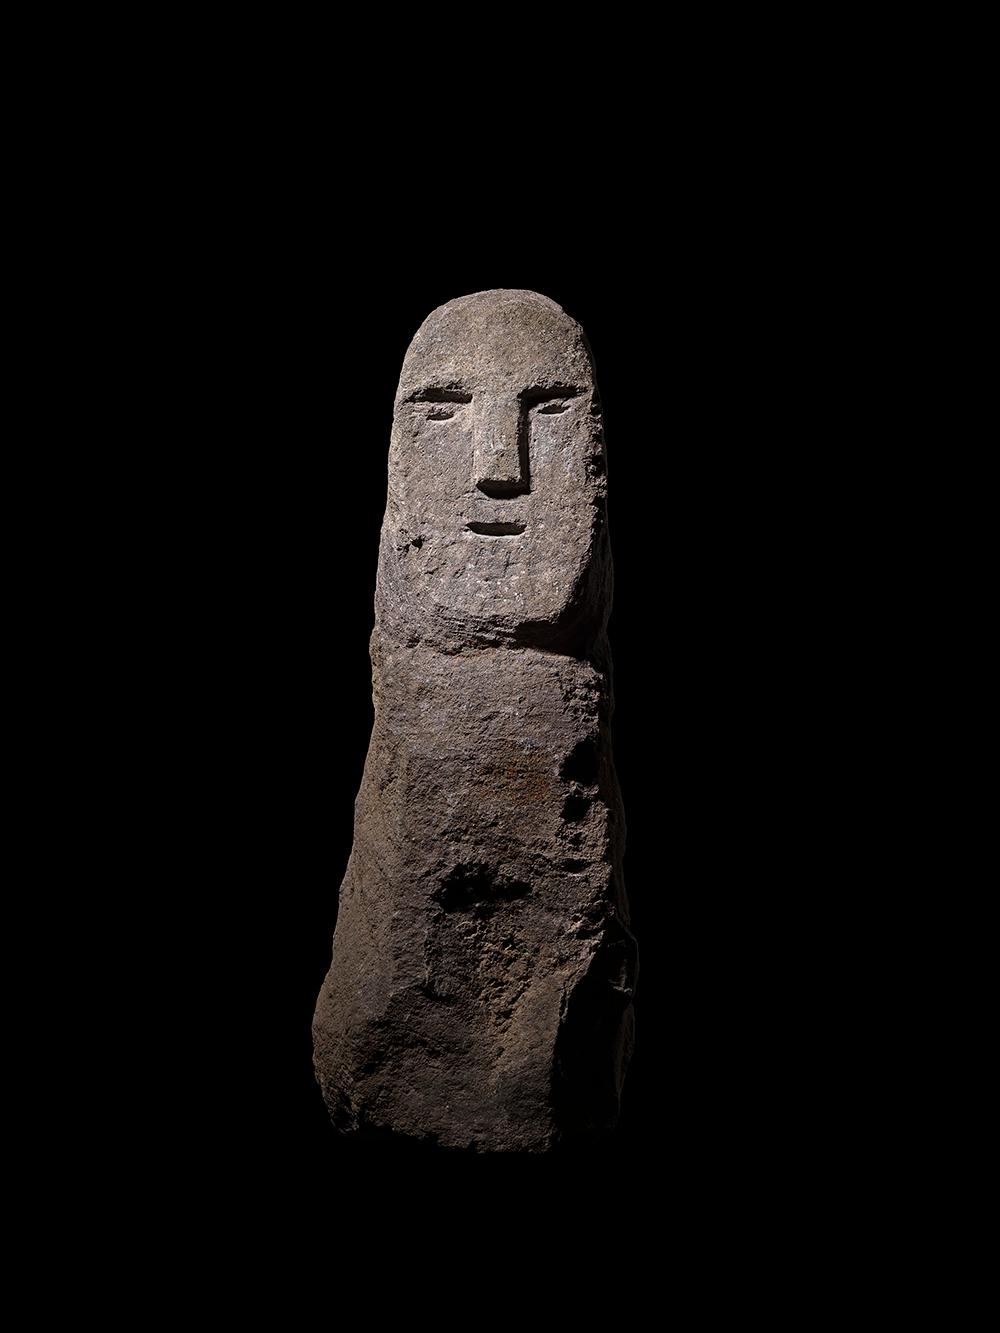 A tall anthropomorphic stele of carved granite, divided into two distinct regions of the body and face. The body is a single unarticulated block, but the facial features are outlined with strong carved lines. A T-shape marks the position of the nose